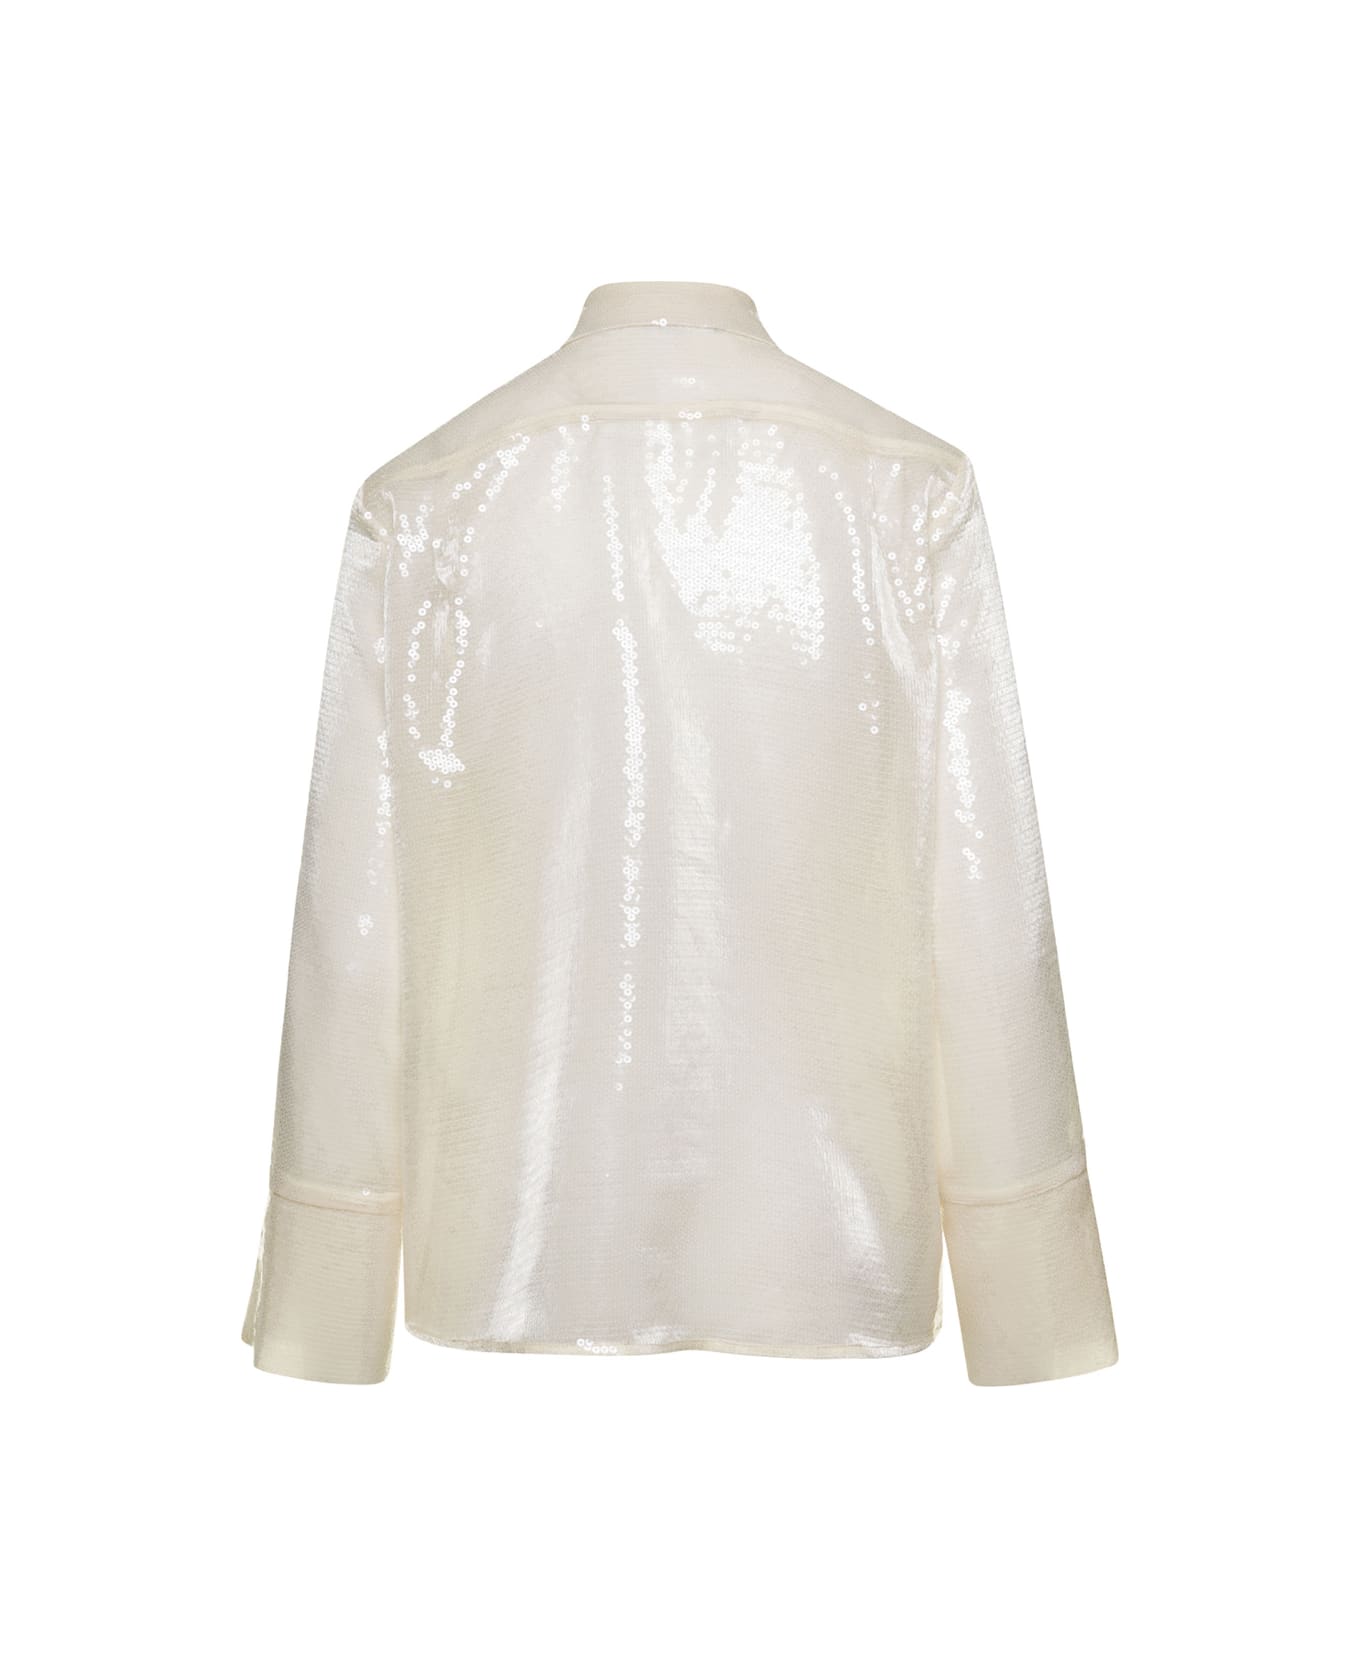 Federica Tosi Cream Shirt With Sequins All Over In Techno Fabric Woman - White シャツ